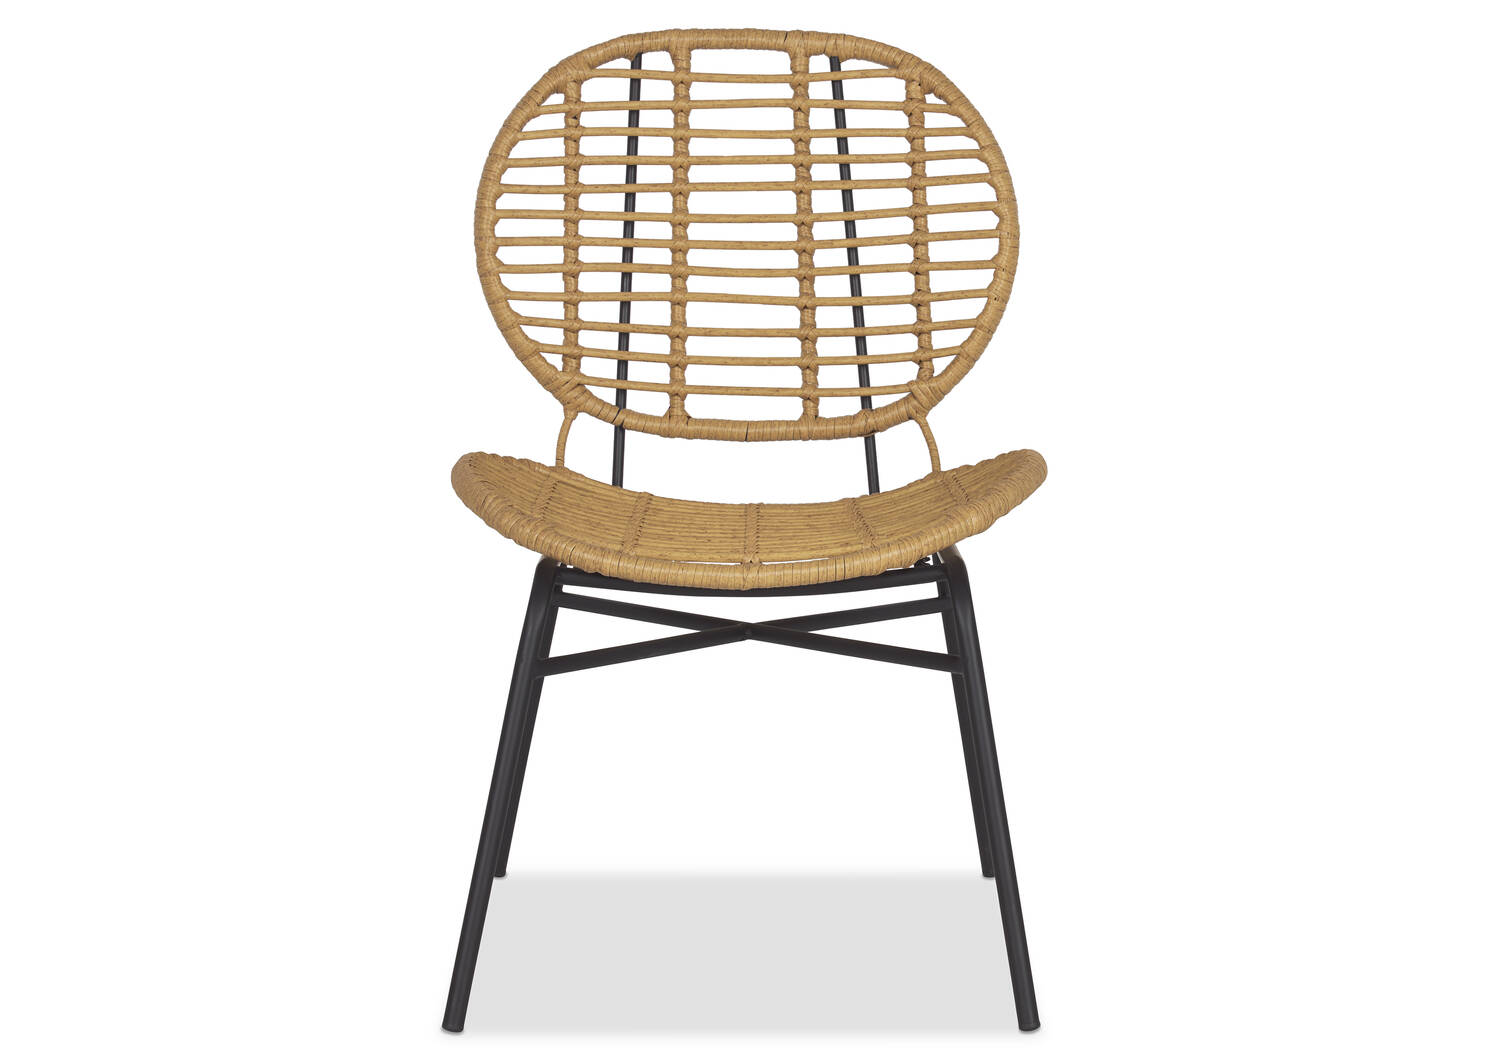 Tria Dining Chair -Natural